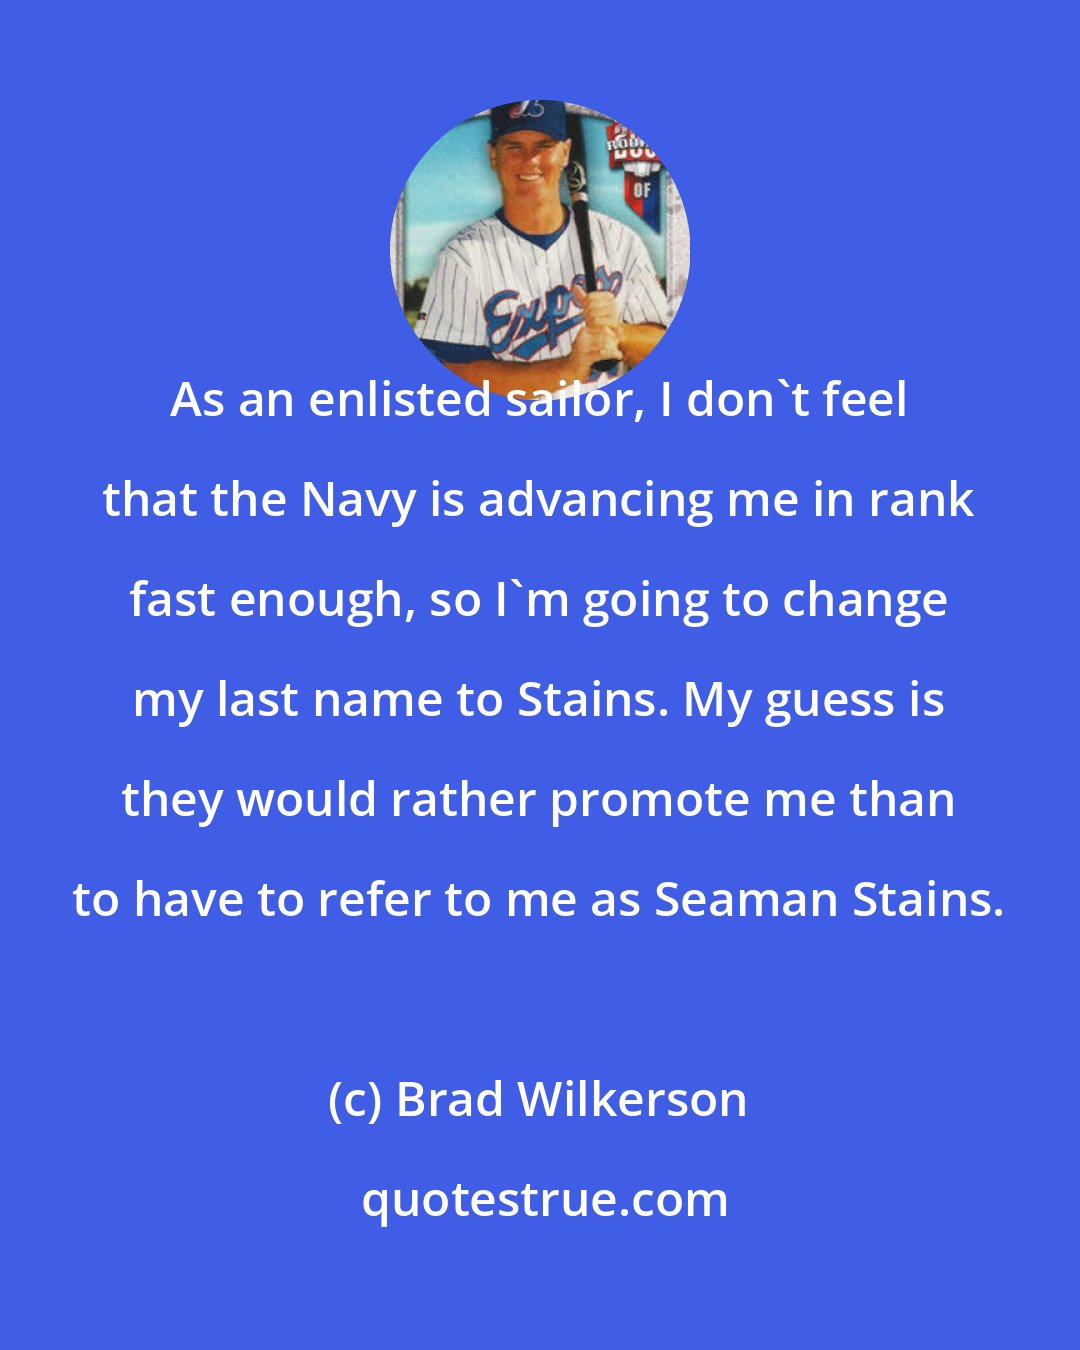 Brad Wilkerson: As an enlisted sailor, I don't feel that the Navy is advancing me in rank fast enough, so I'm going to change my last name to Stains. My guess is they would rather promote me than to have to refer to me as Seaman Stains.